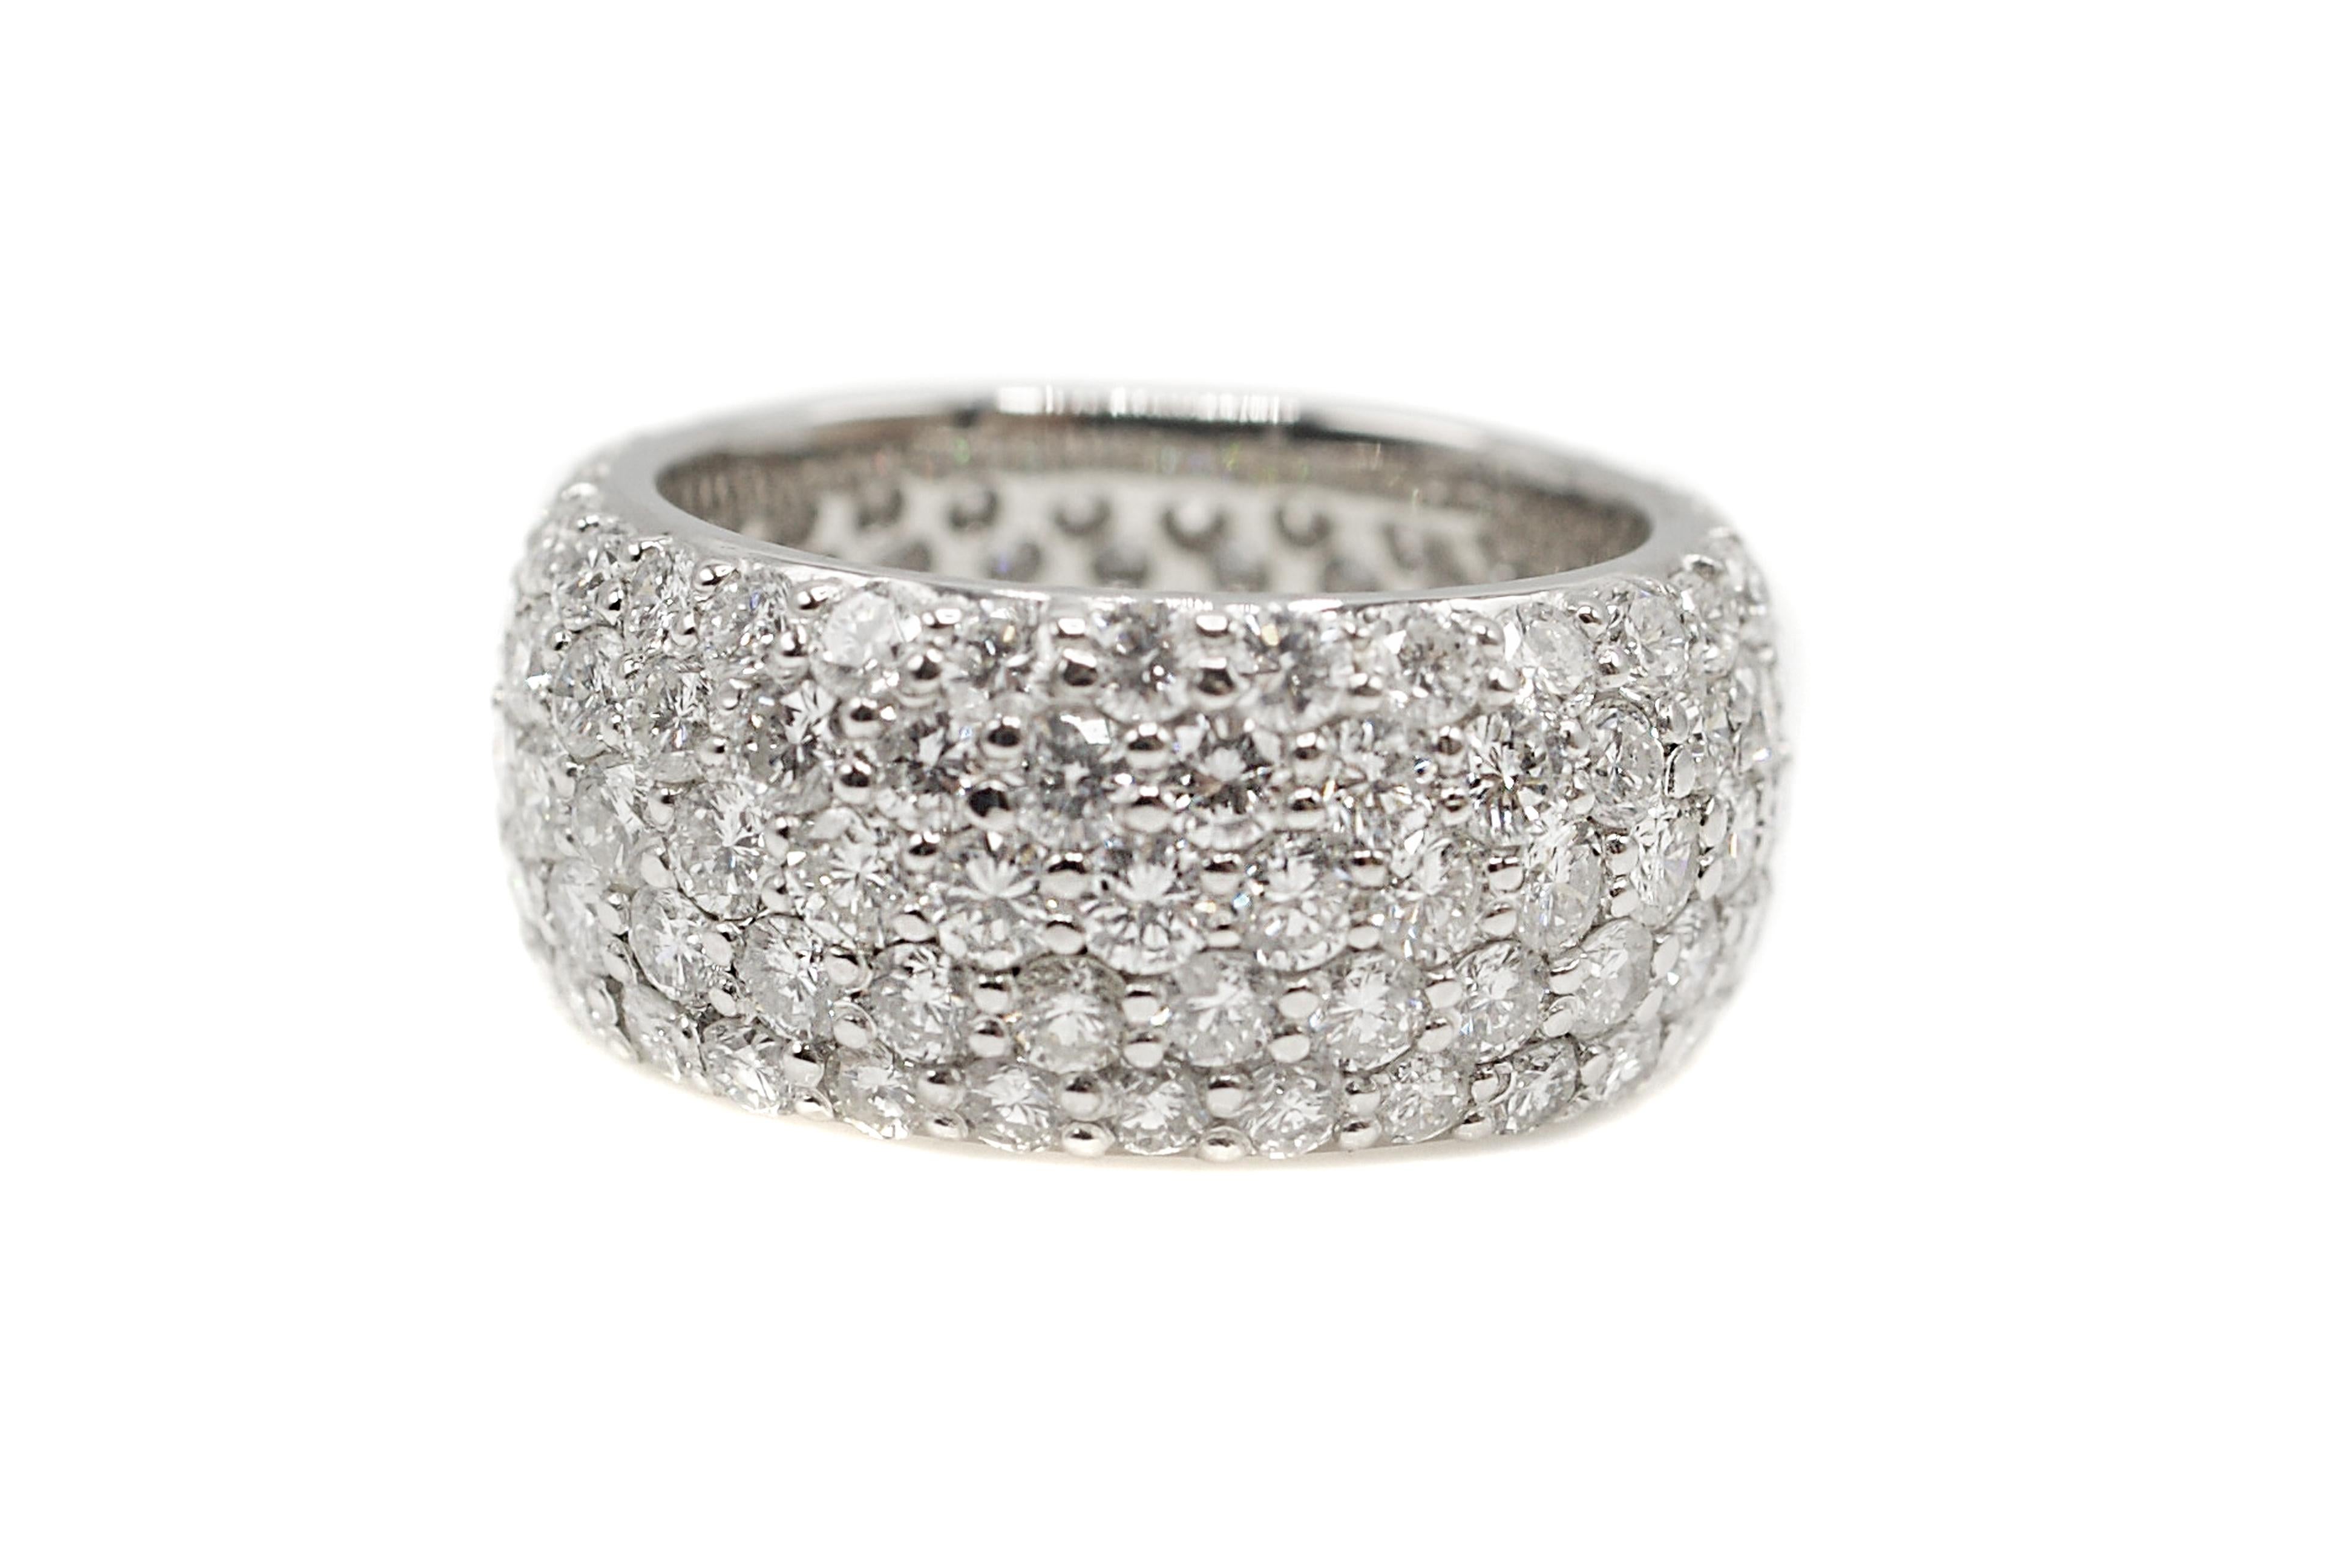 This impressive incredibly well hand-crafted eternity band is set with 135 white, bright and sparkly round brilliant cut diamonds. The 5 rows of diamonds which elegantly slightly curve over the finger are bead set with diamonds which are perfectly